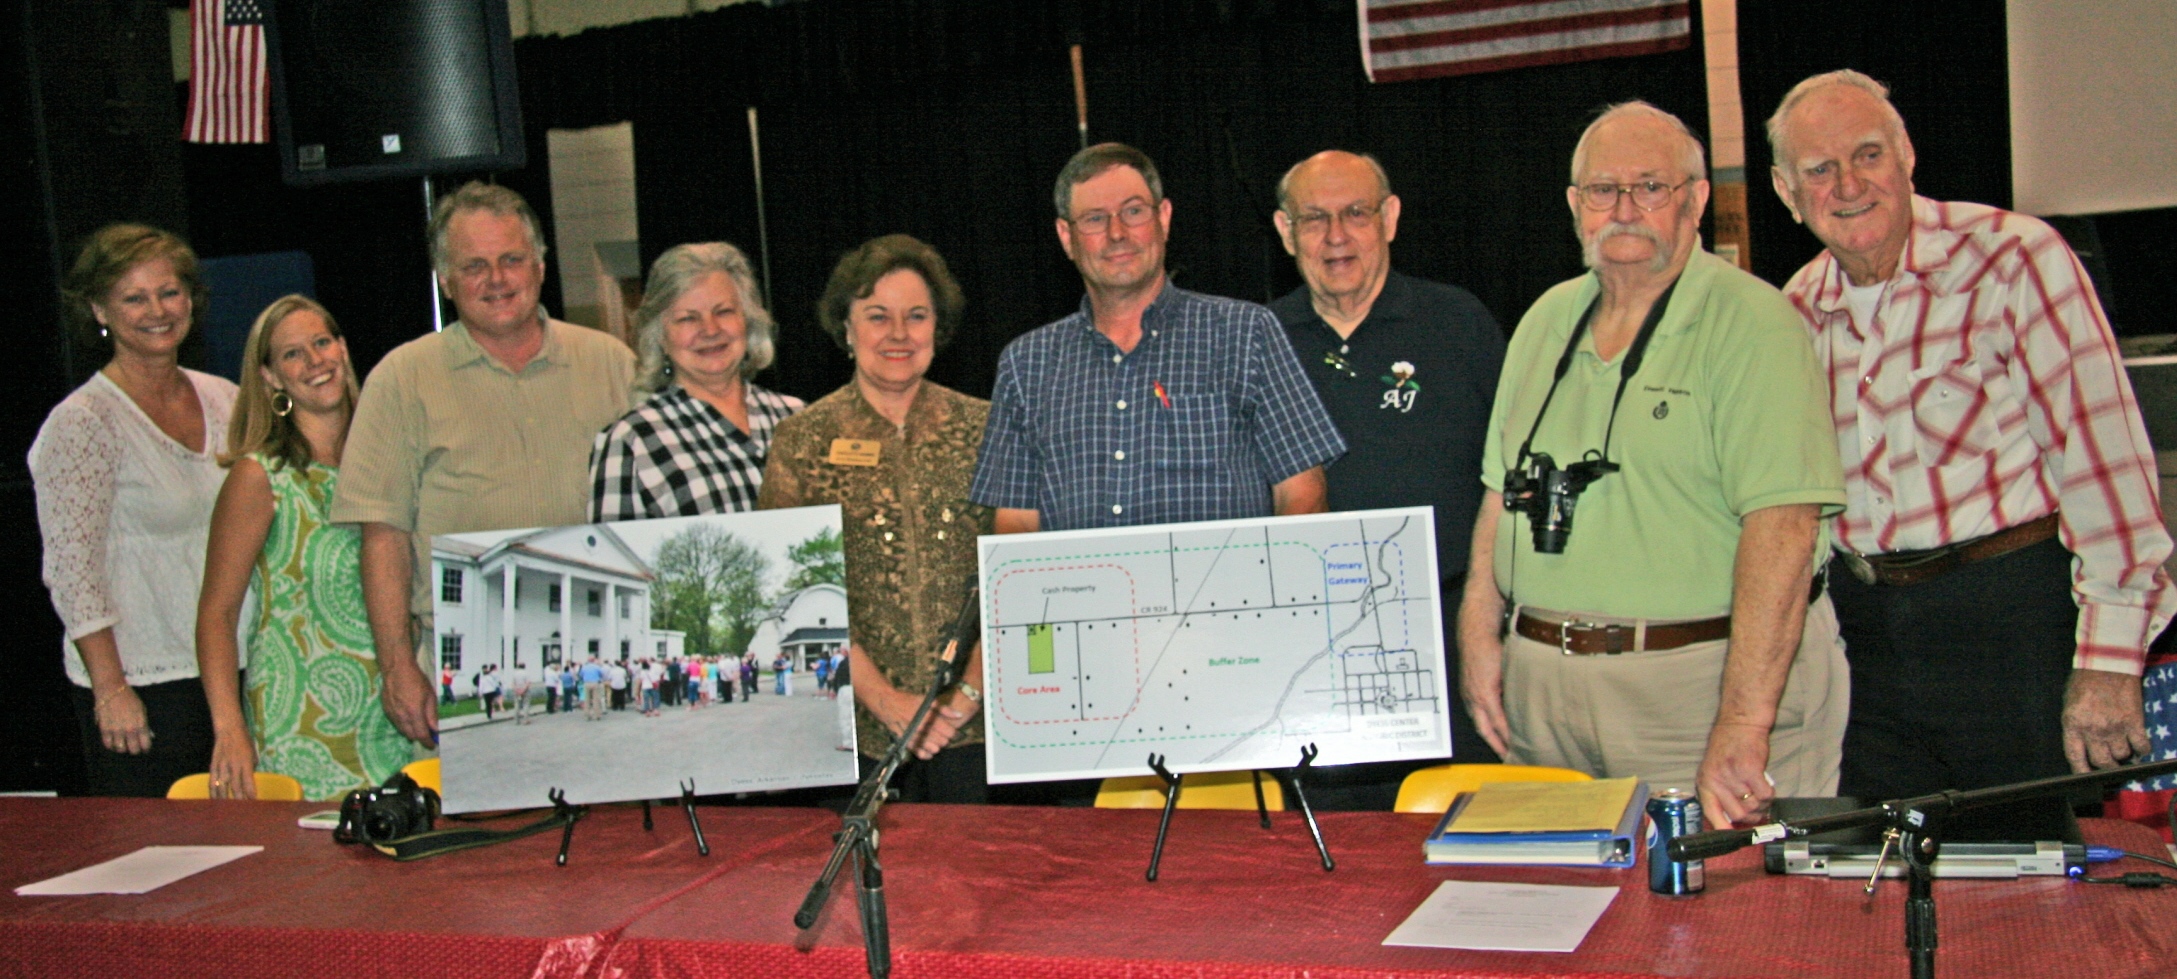 Key participants in town meeting to present Dyess Master Plan included Paula Miles, Arkansas State University; Beth Wiedower, National Trust for Historic Preservation; State Sen. Steve Bryles;  Dr. Ruth Hawkins, Arkansas State University; State Rep. Charolette Wagner; Dyess Mayor Larry Sims; A. J. Henson; Everett Henson; and J. E. Huff